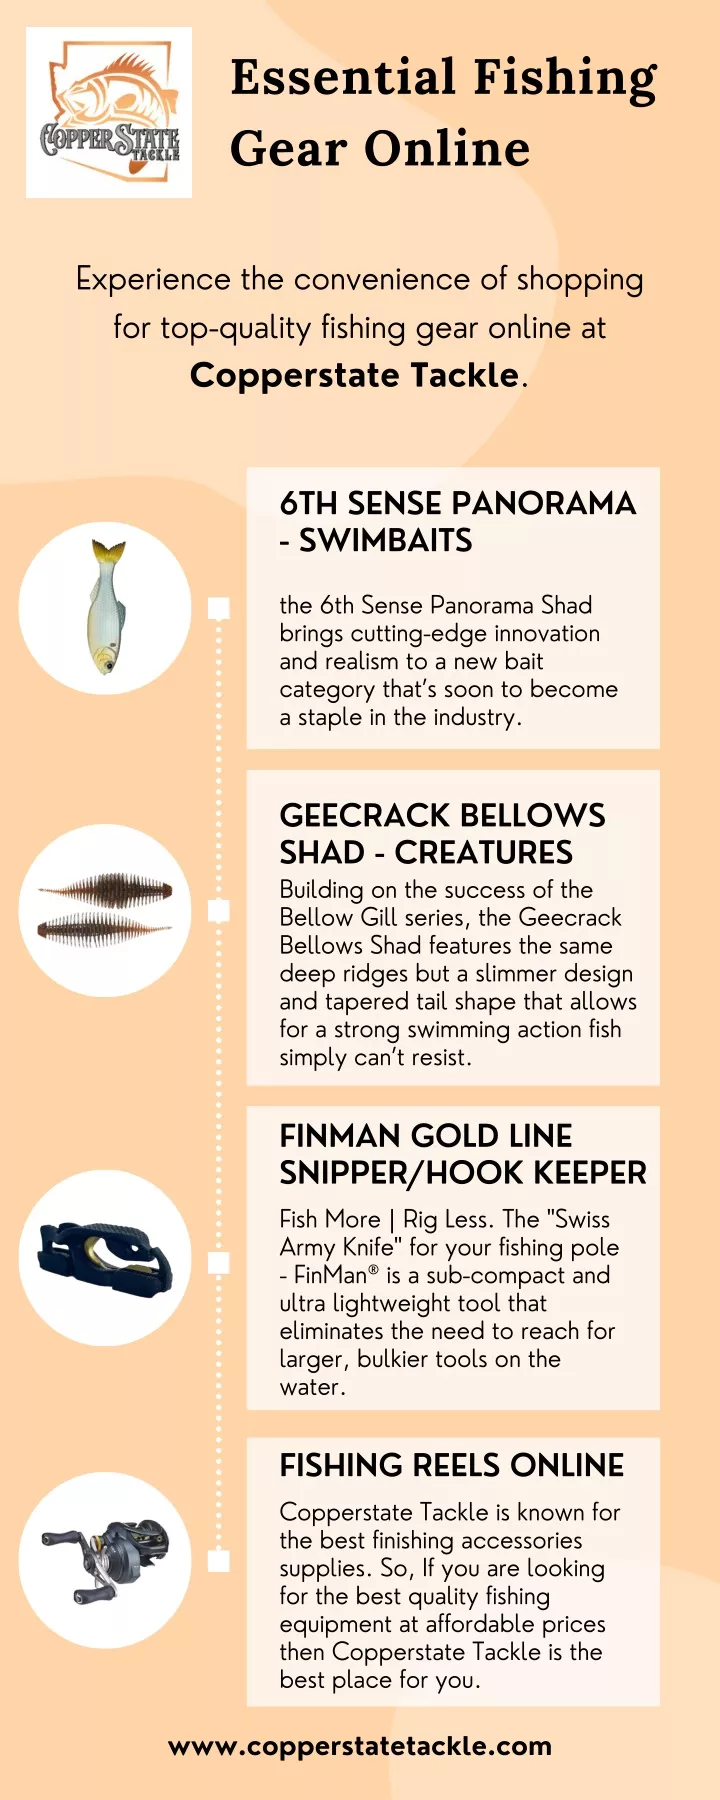 PPT - Essential Fishing Gear Online - Copperstate Tackle